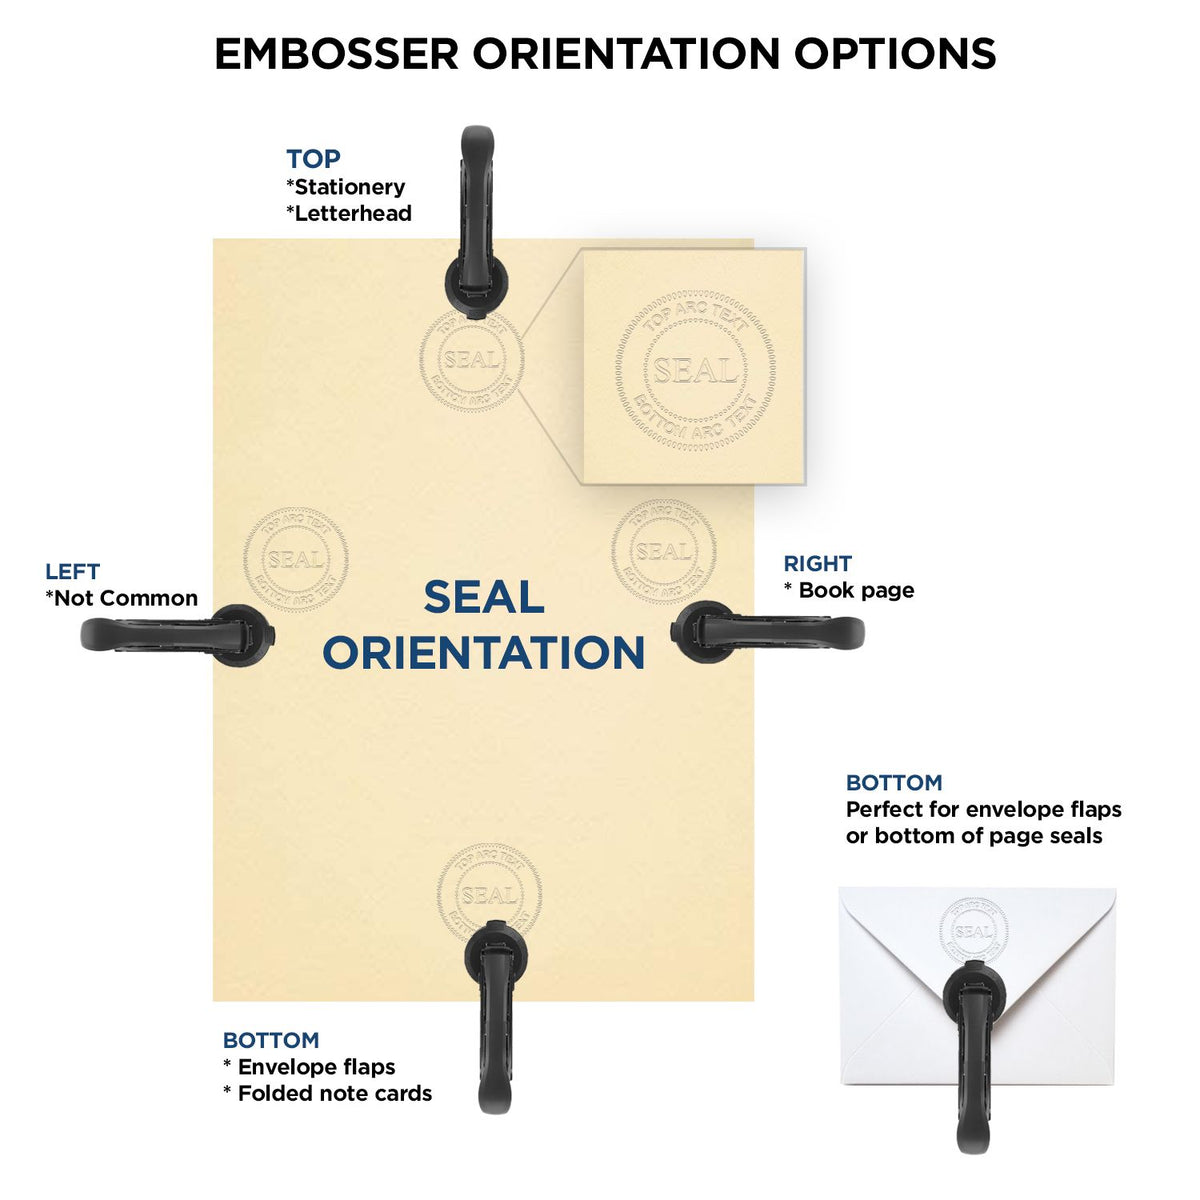 An infographic for the Long Reach Iowa Land Surveyor Seal showing embosser orientation, this is showing examples of a top, bottom, right and left insert.